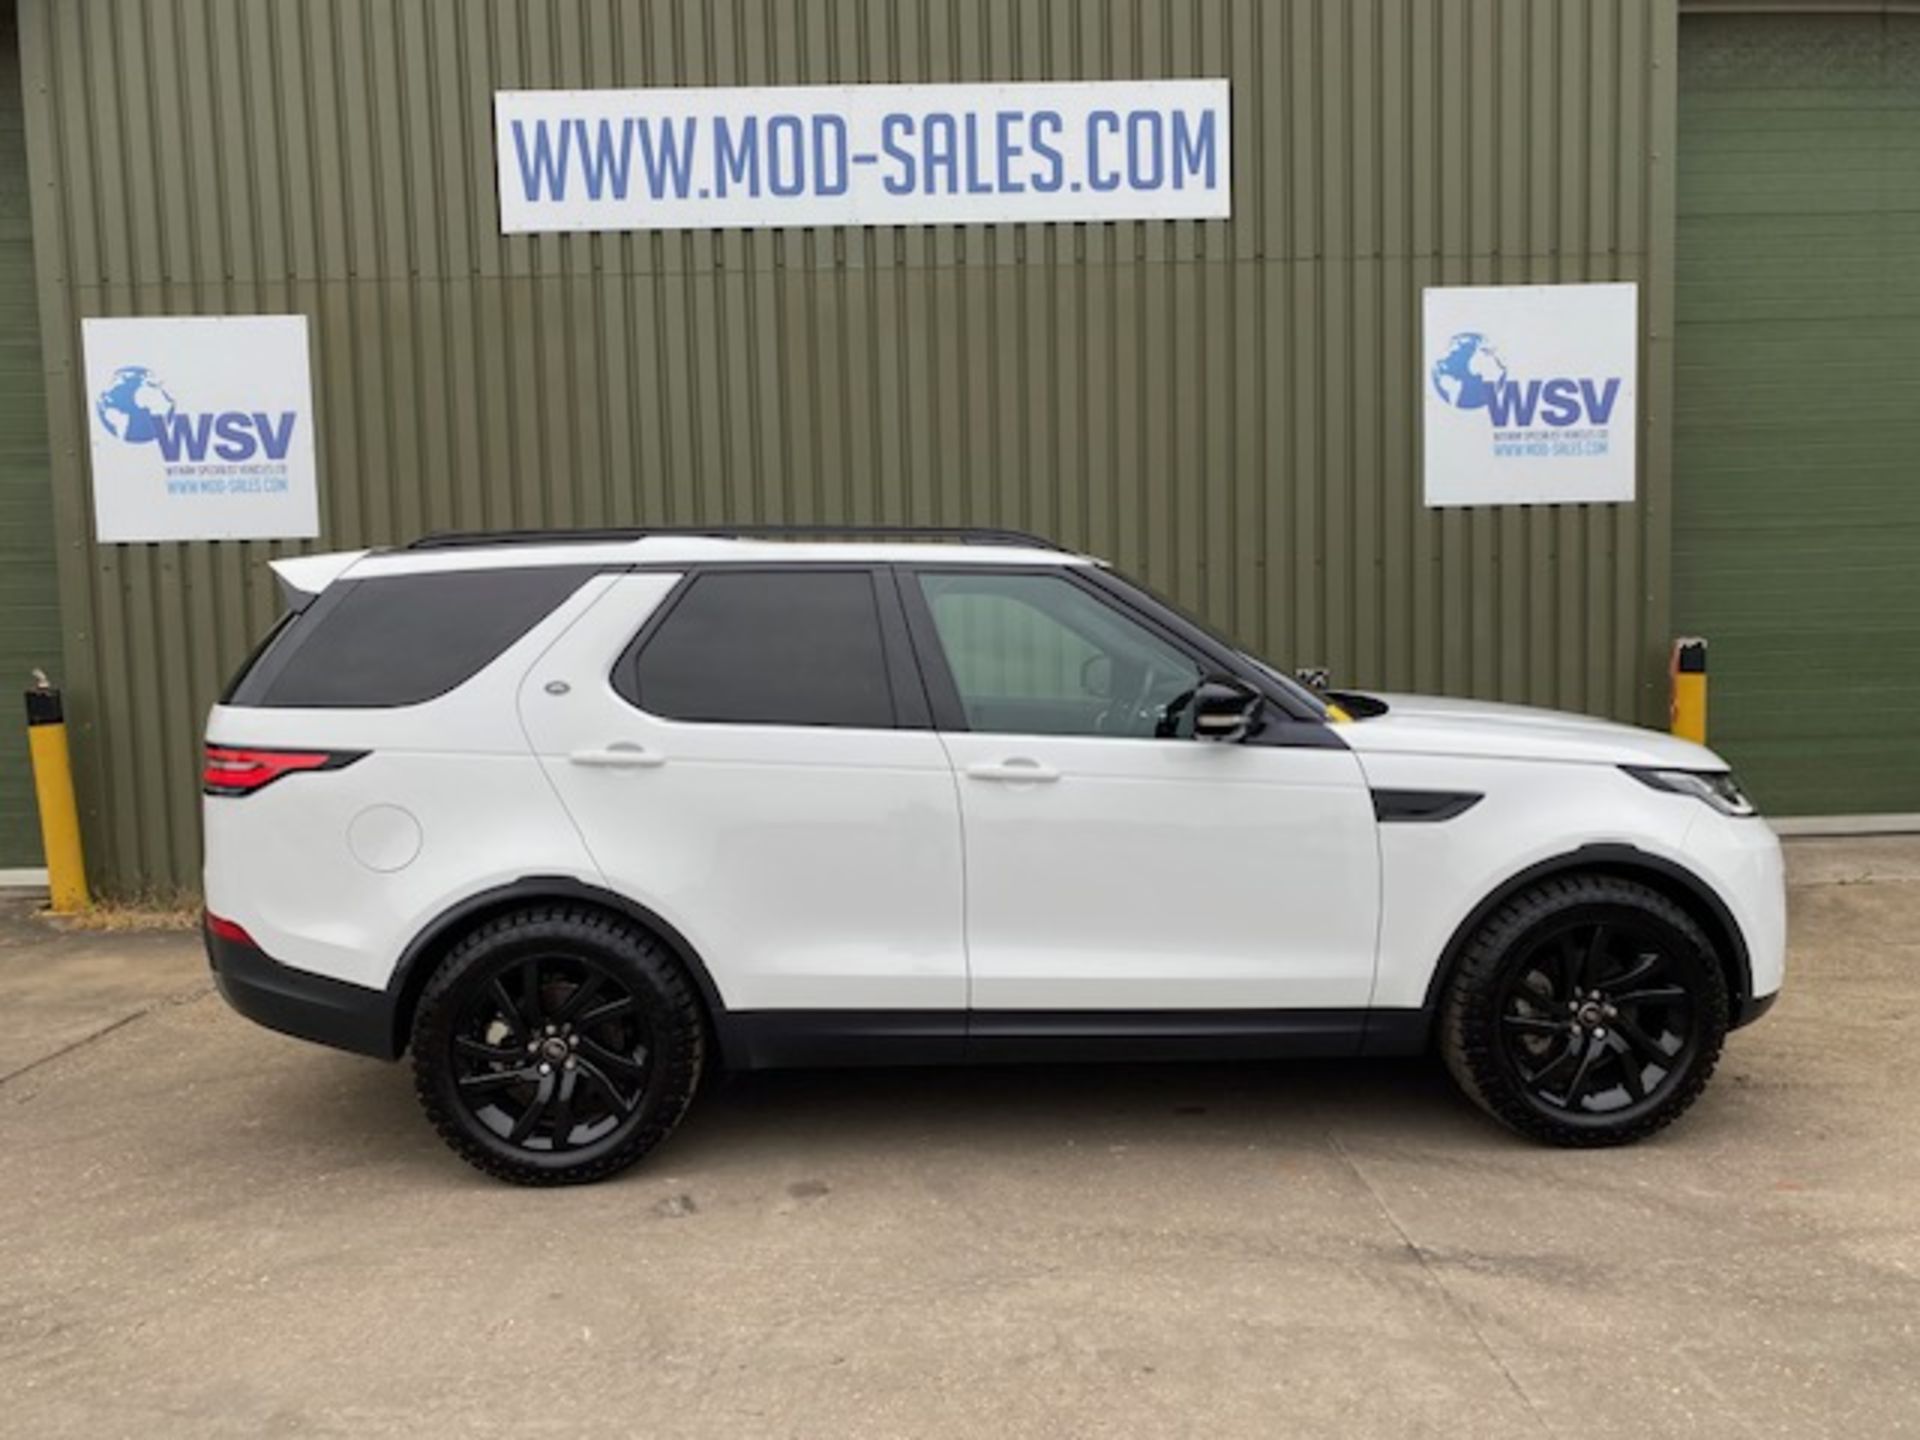 2019 model year Land Rover Discovery 5 3.0 TDV6 HSE Luxury RHD ONLY 5778 MILES! - Bild 5 aus 21